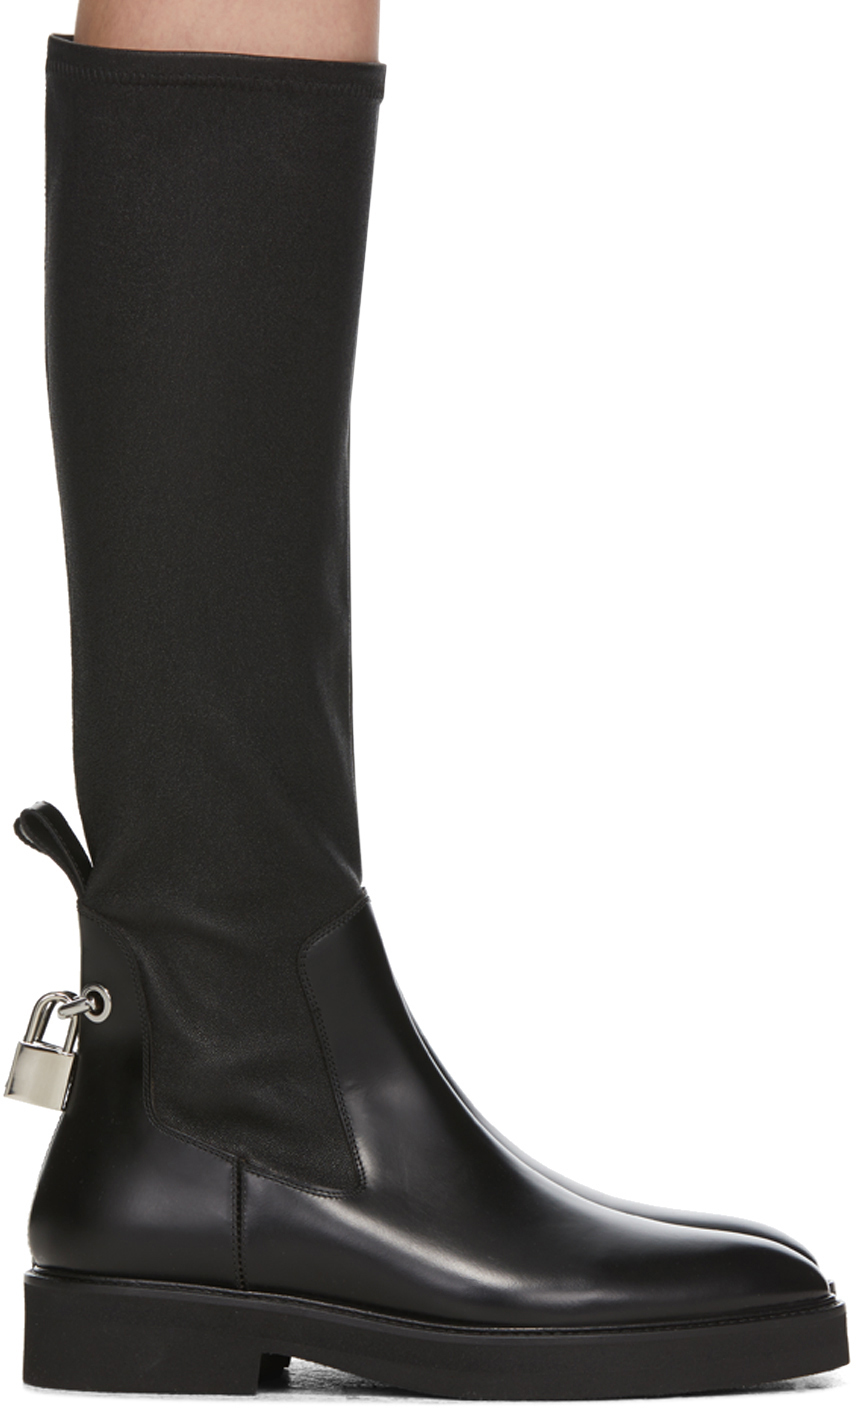 Black Flat High Boots by Christopher 